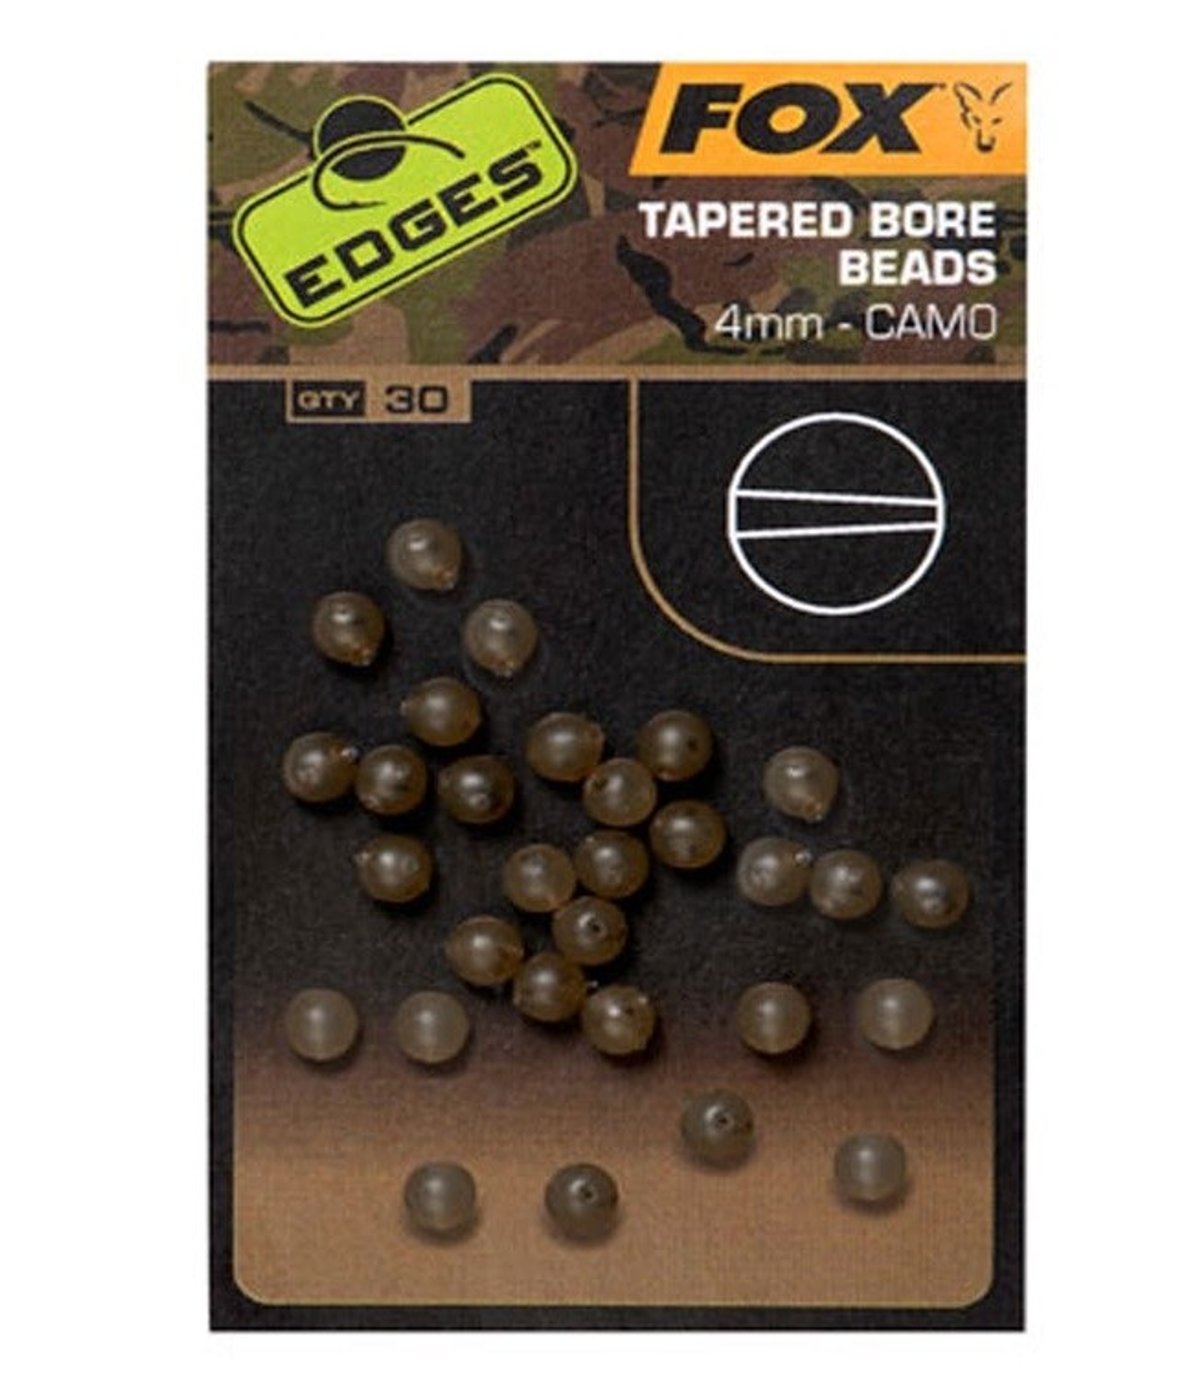 FOX EDGES CAMO TAPERED BORE BEADS 4MM